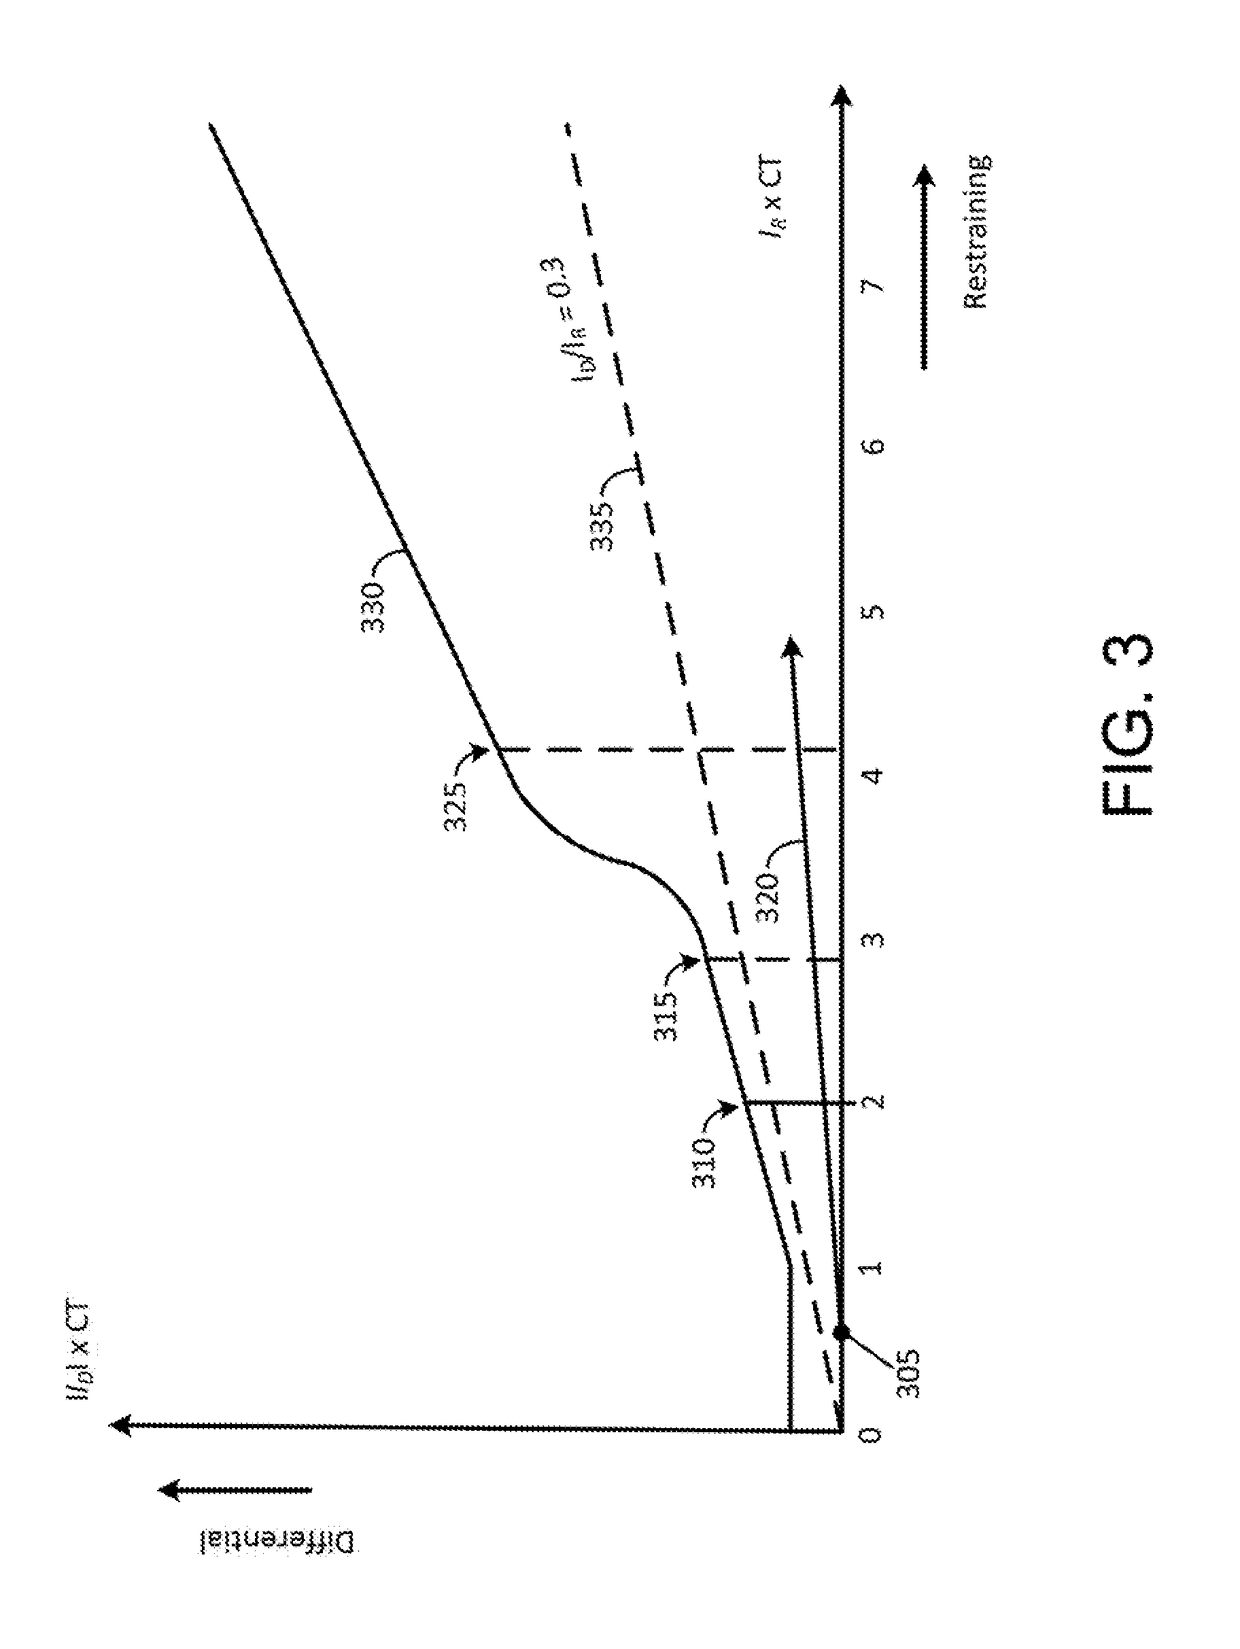 Systems and methods for monitoring and diagnosing transformer health